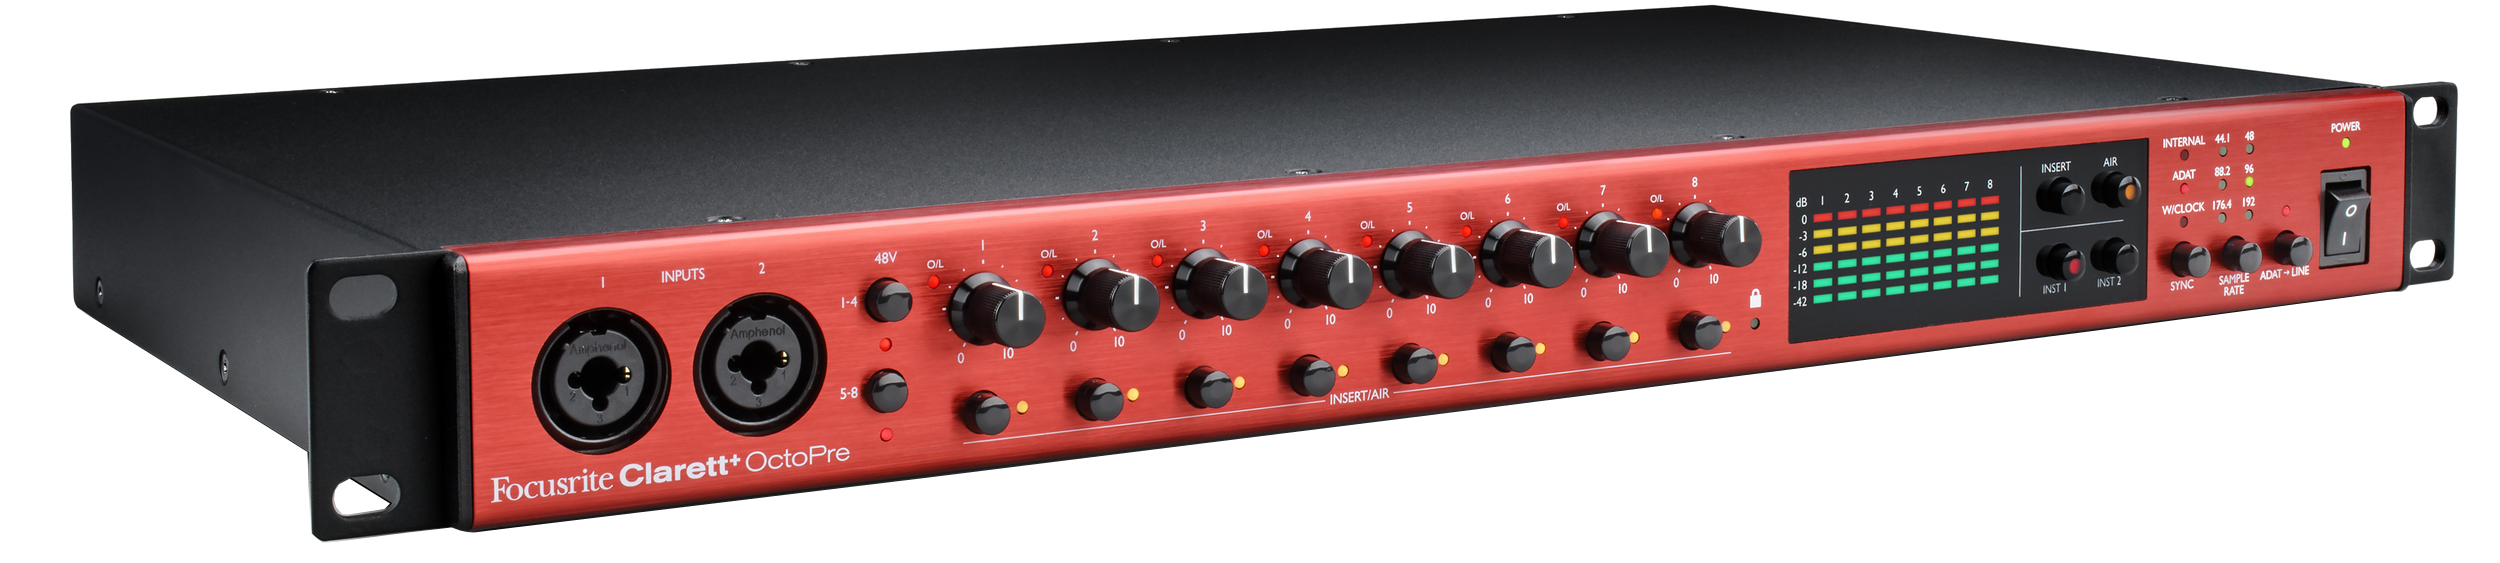 8 channel ADAT microphone preamp